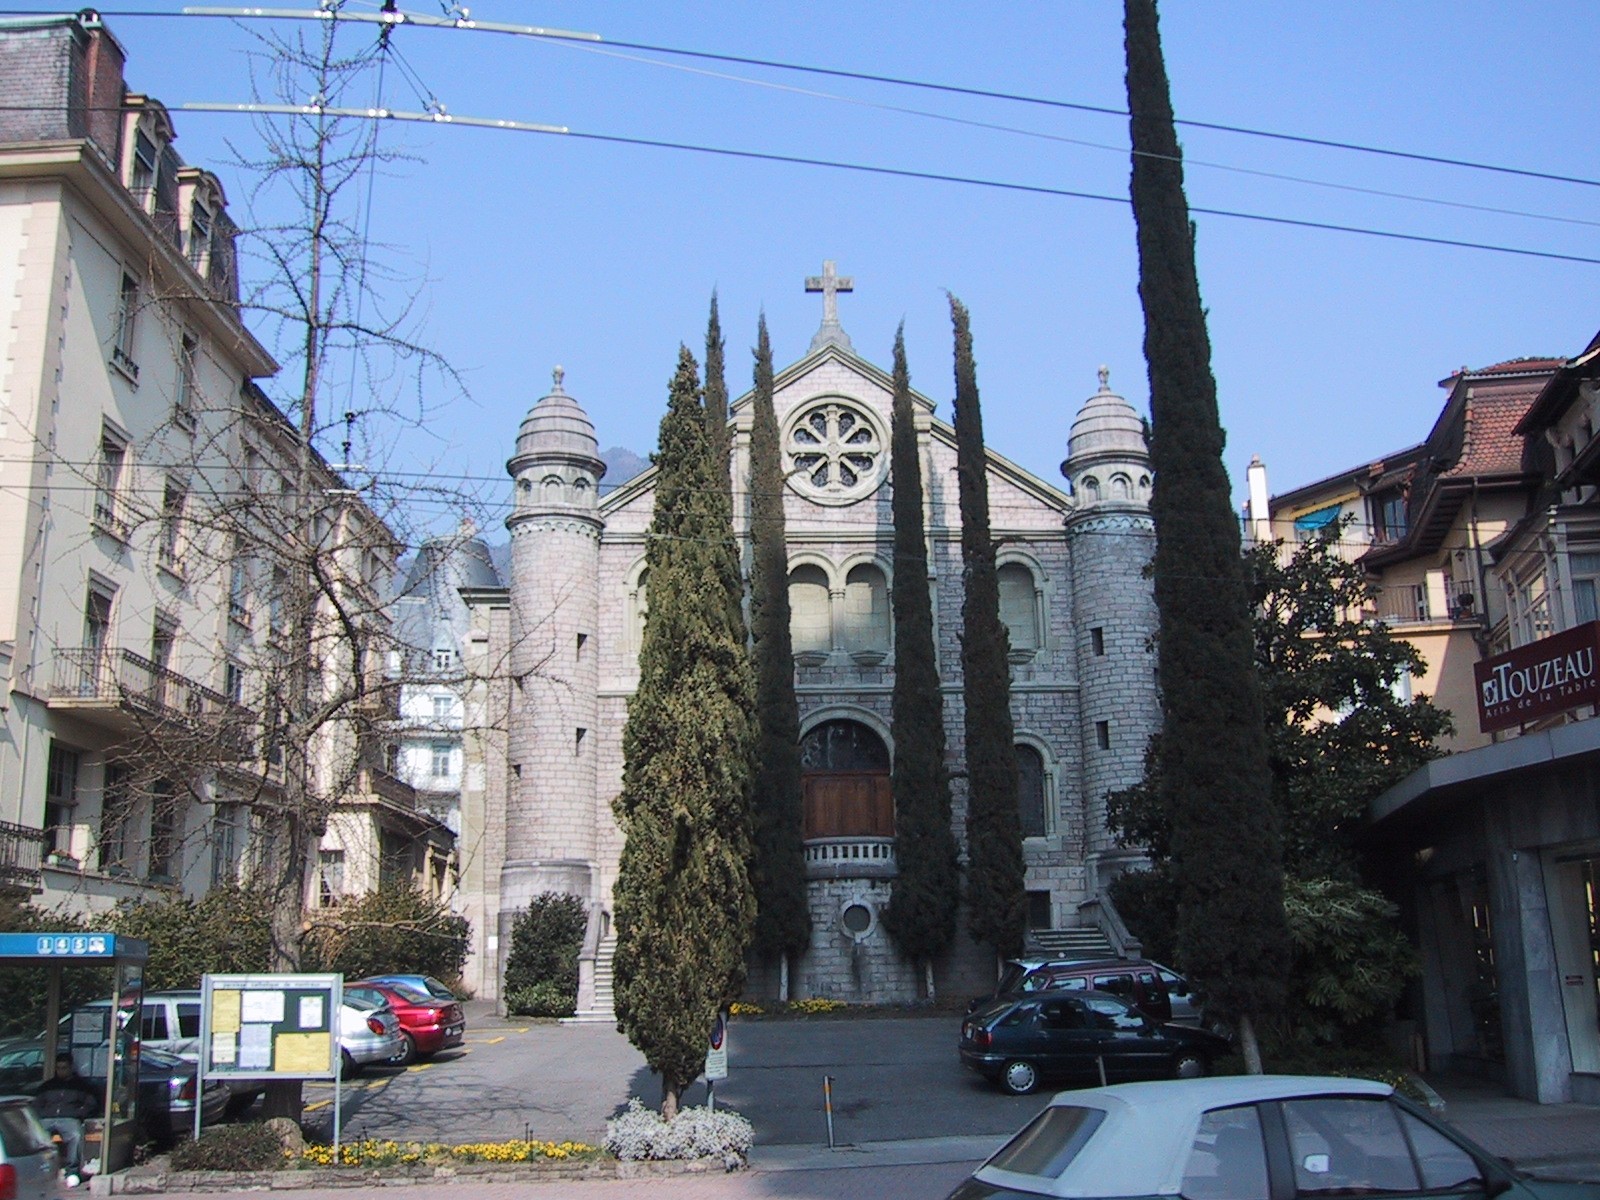 an image of an old church in the city